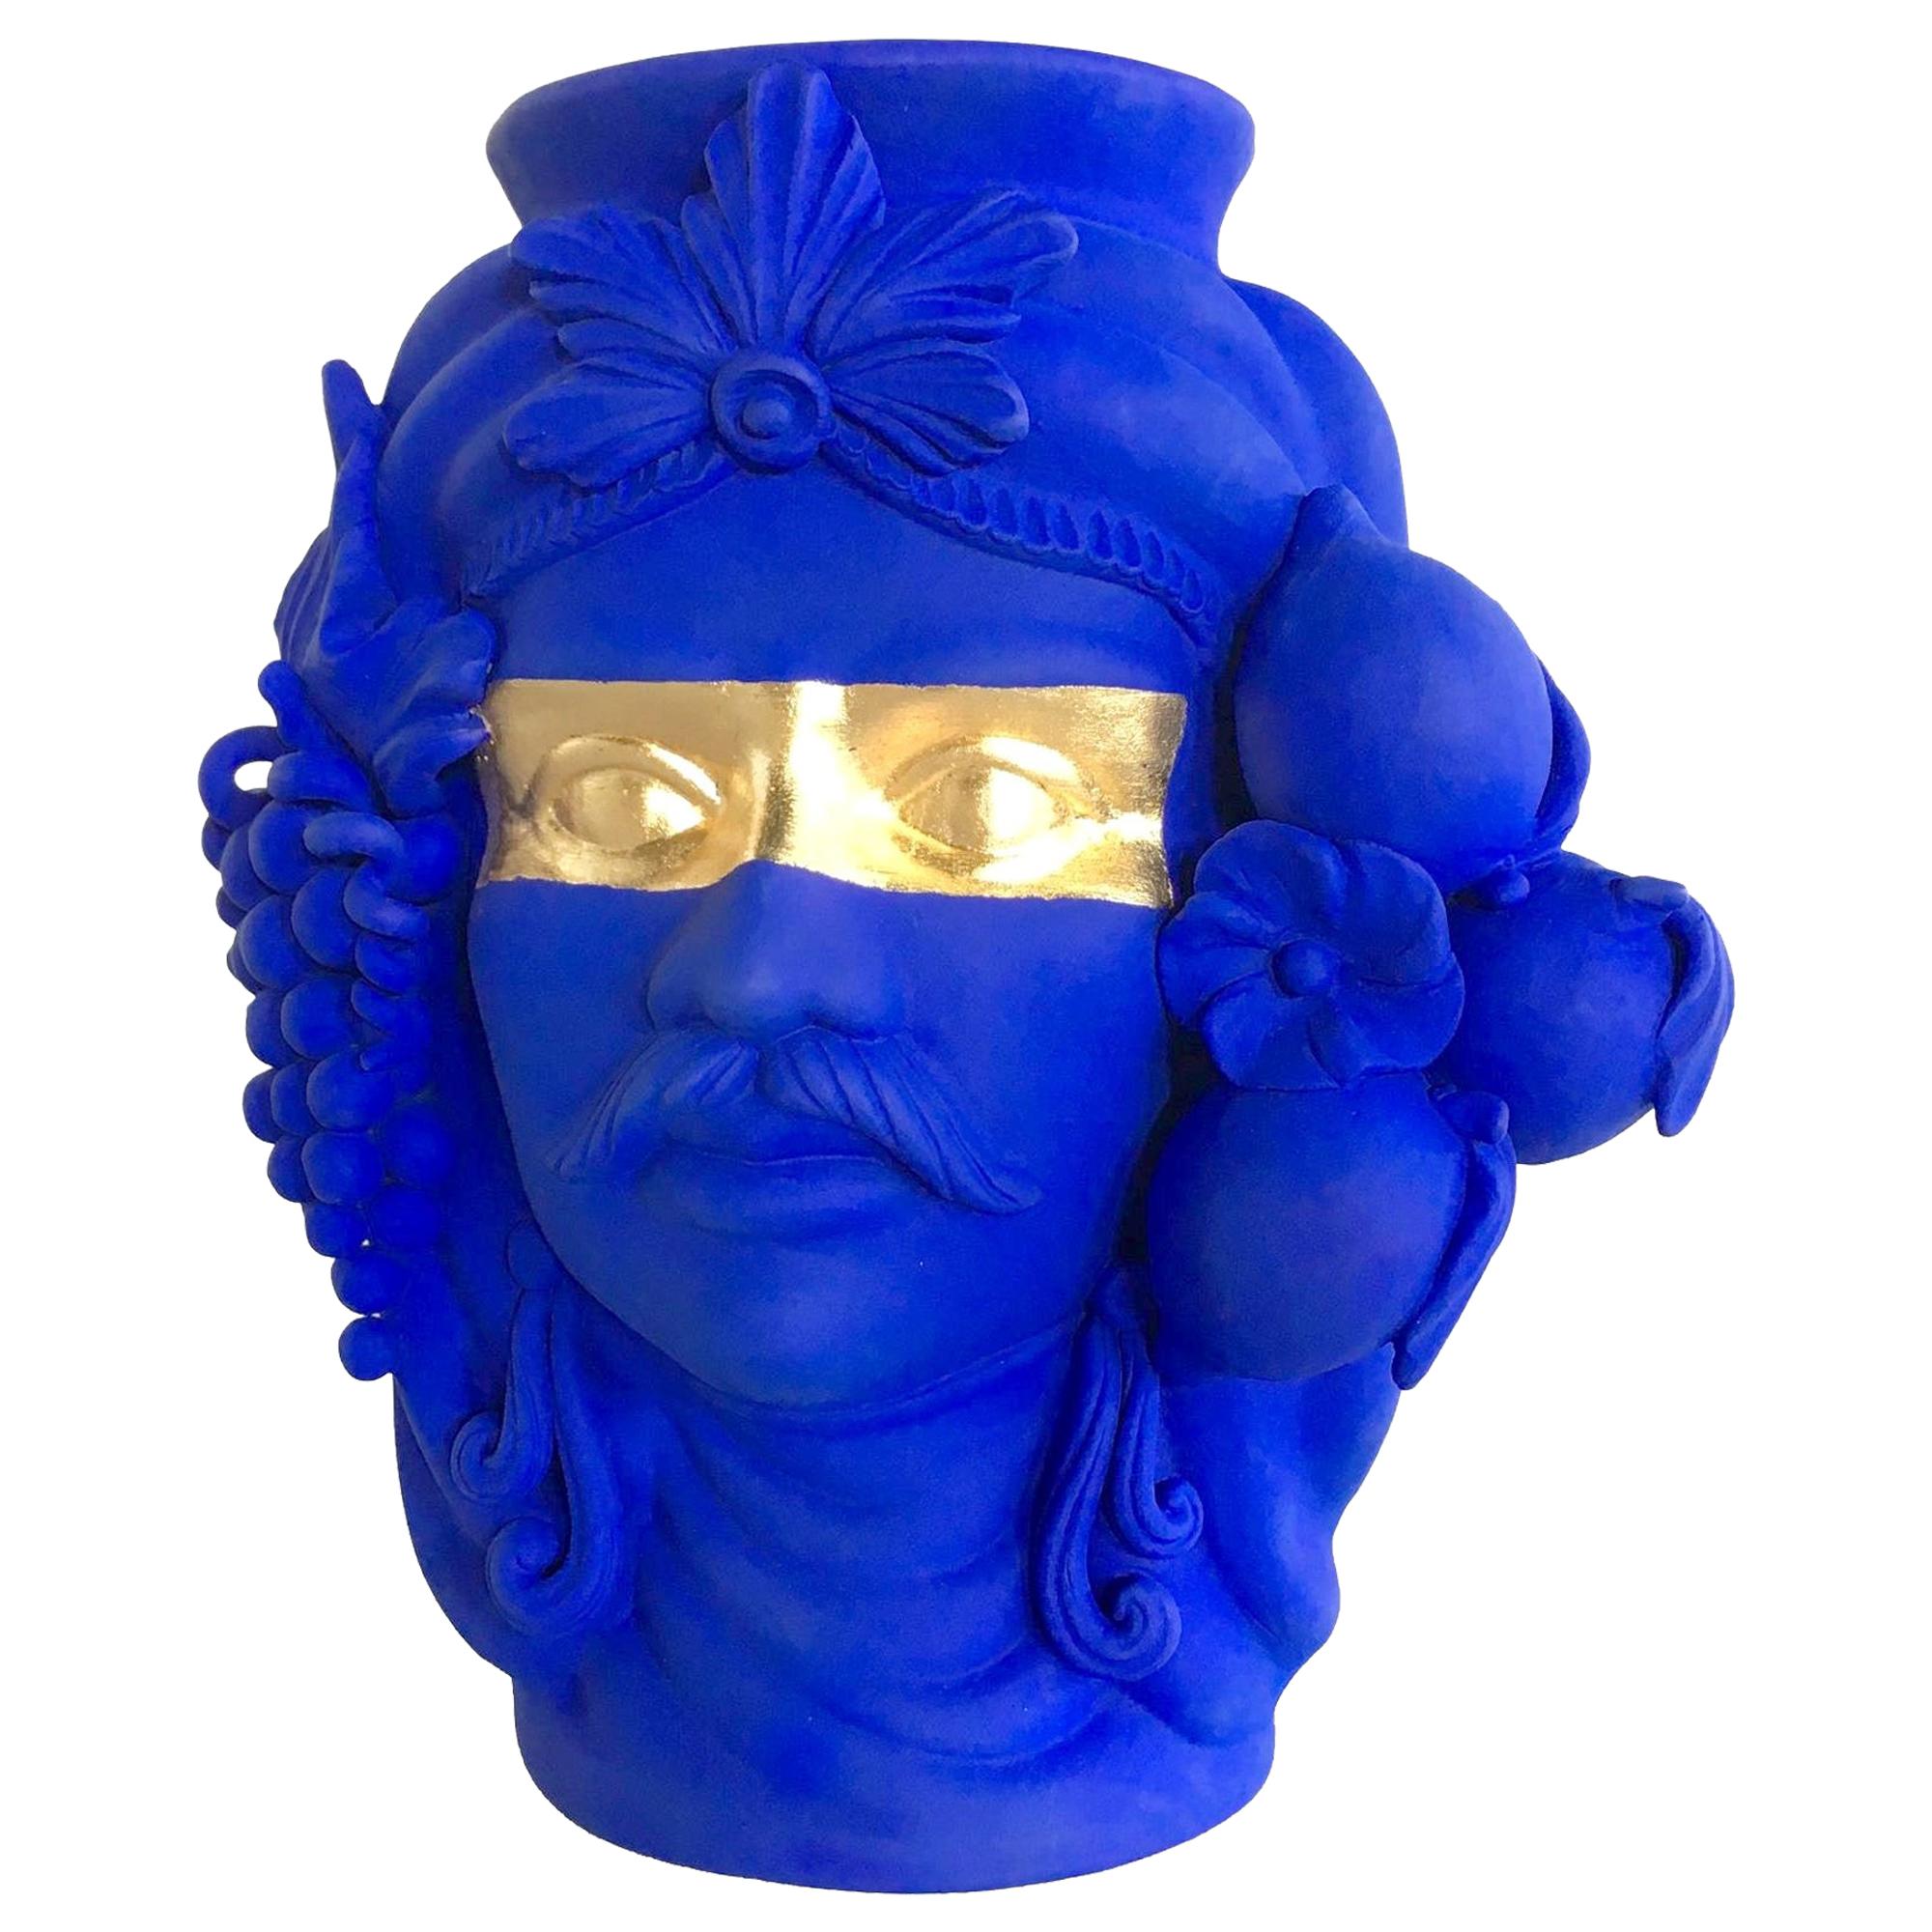 In Stock in Los Angeles, Blue & Gold Sasa Vase, Made in Italy